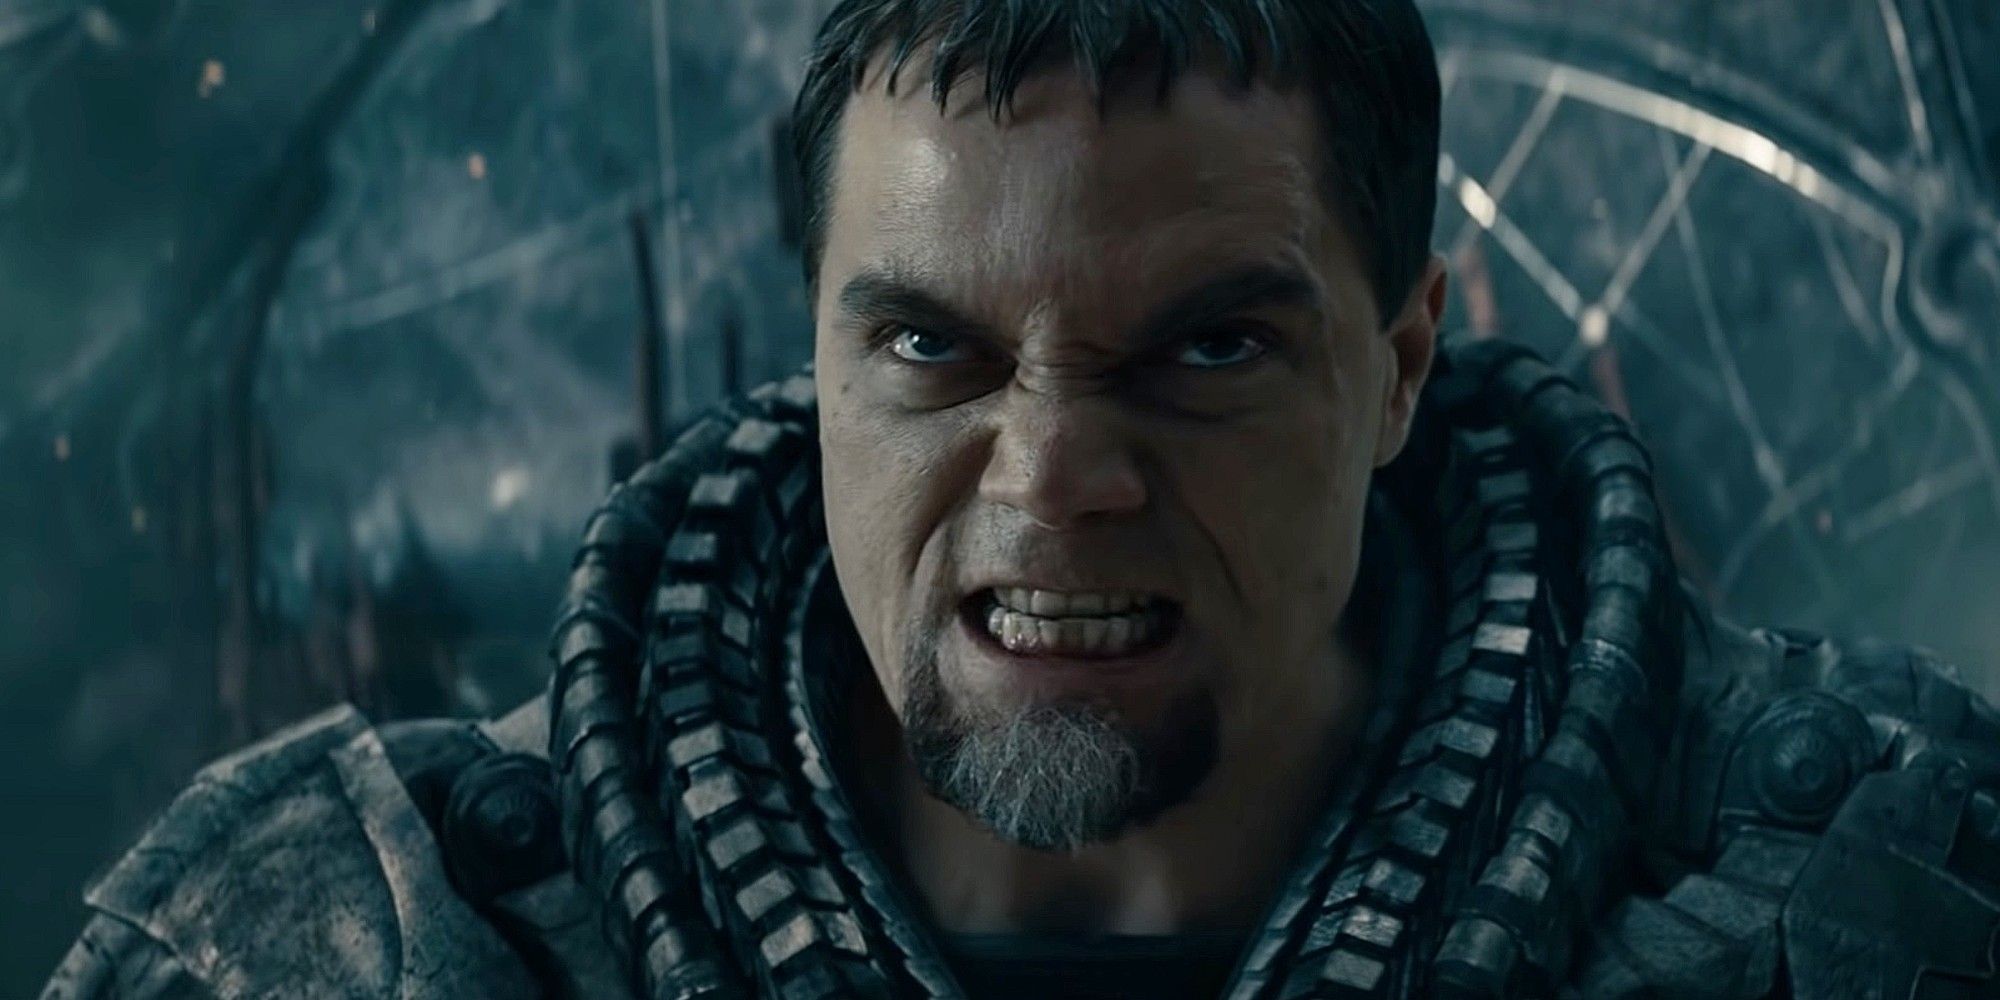 Man Of Steel's General Zod Will Reportedly Return In The Flash